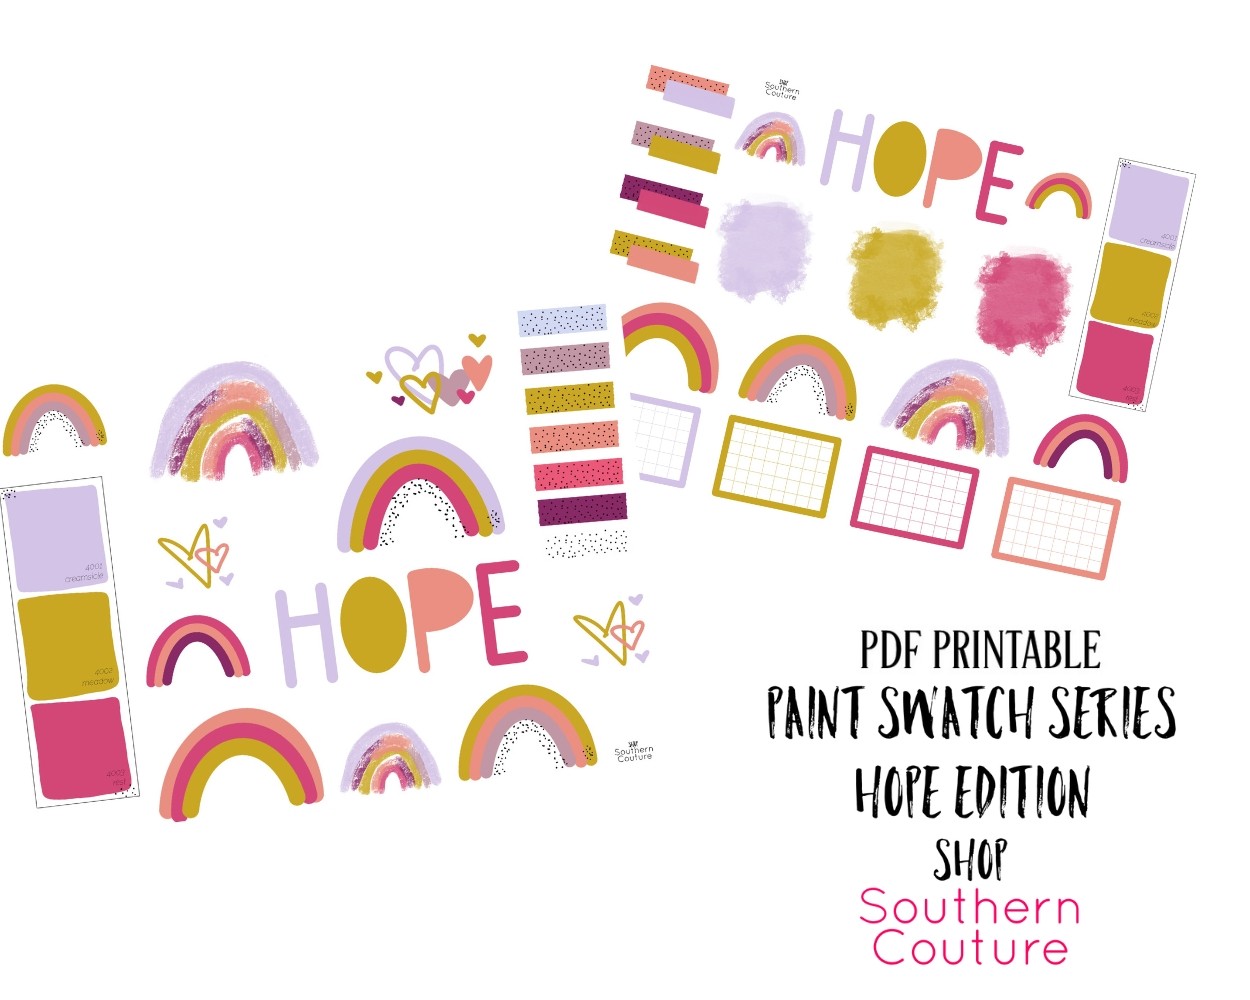 Hope Bible Journaling Process Video using New Printables 